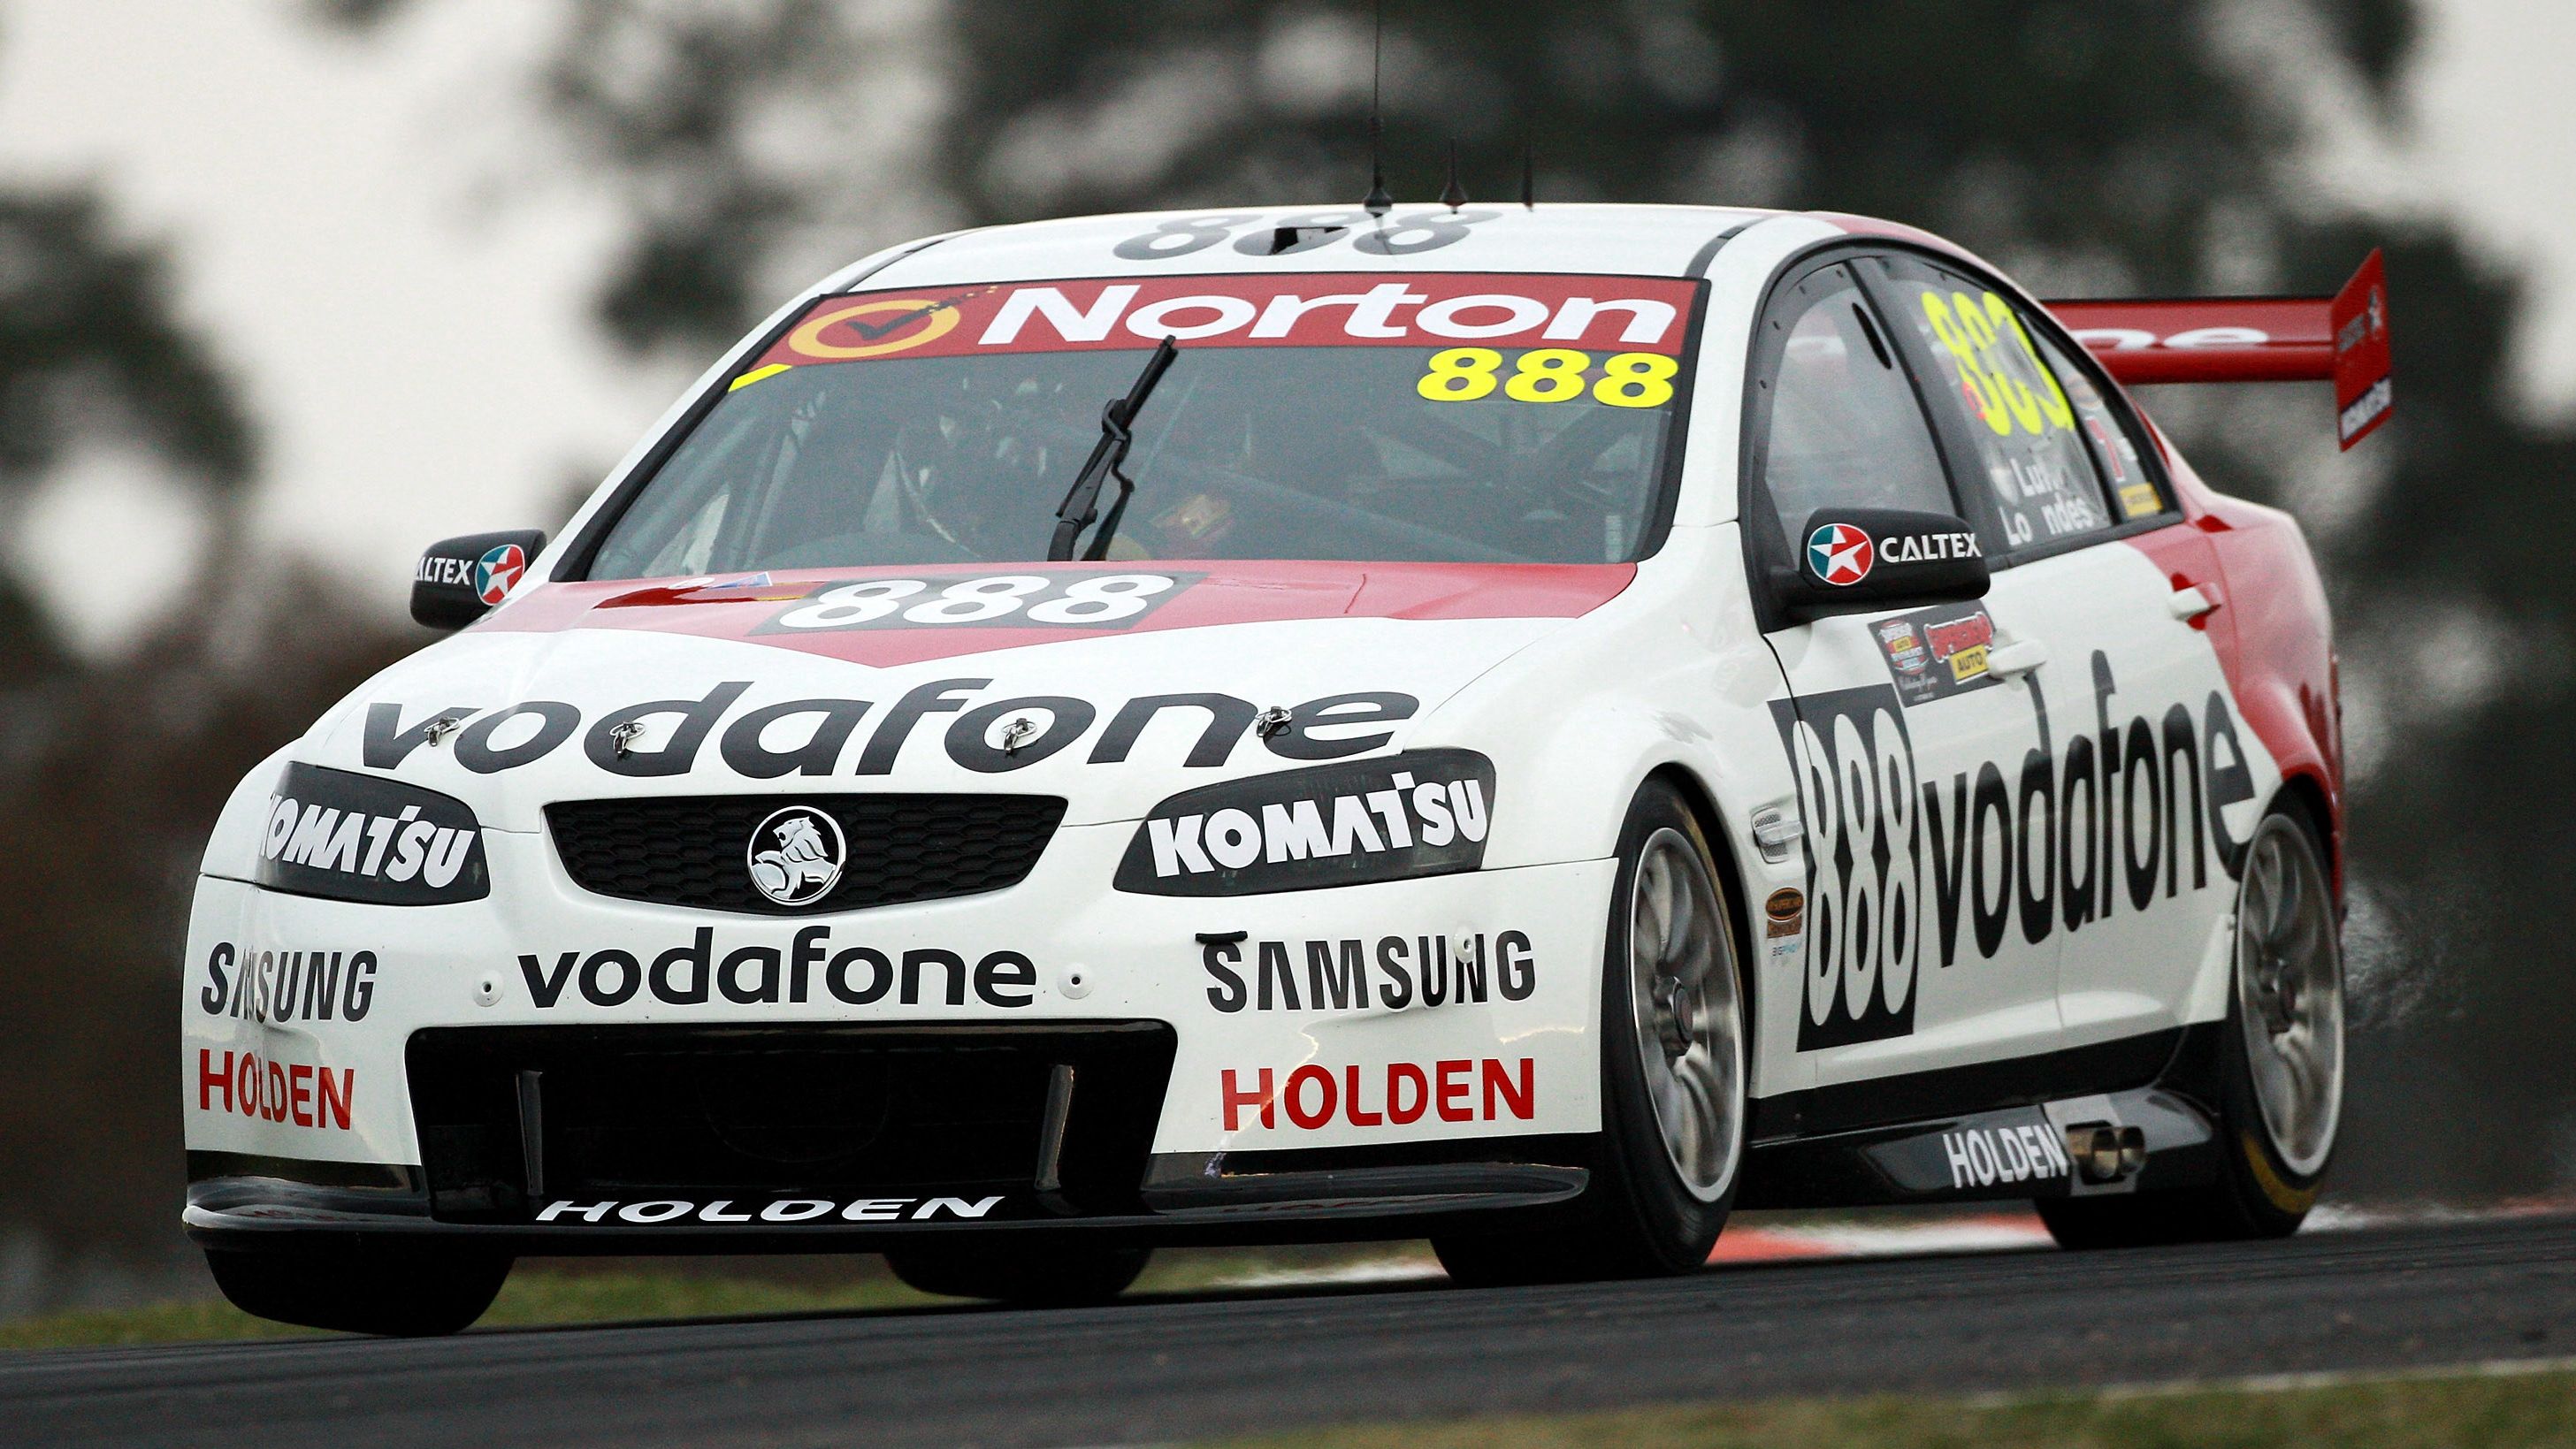 Craig Lowndes and Warren Luff carried a retro livery paying tribute to Peter Brock in the 2012 Bathurst 1000.